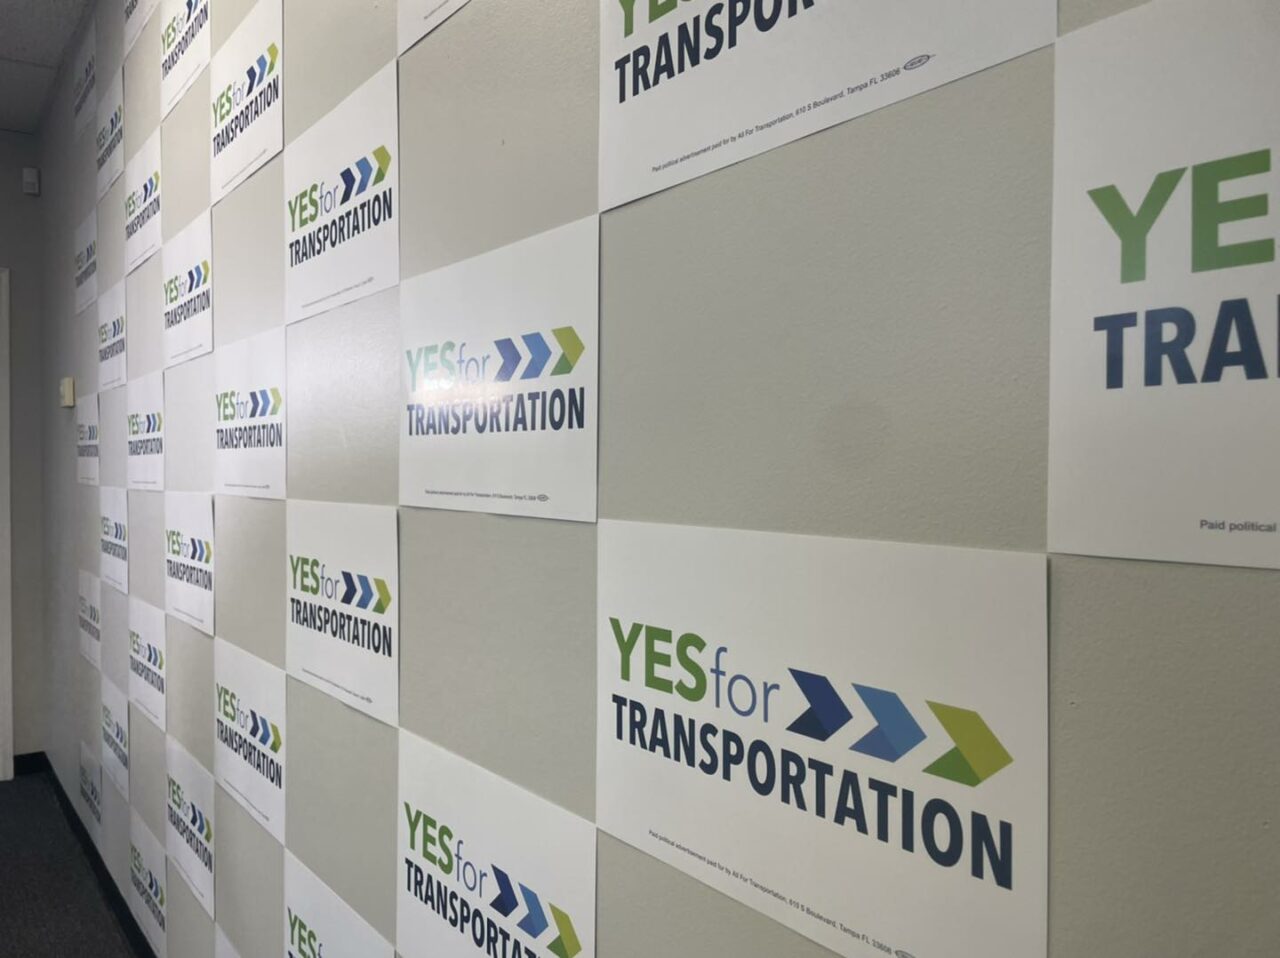 Yes-for-transportation-1280x958.jpeg